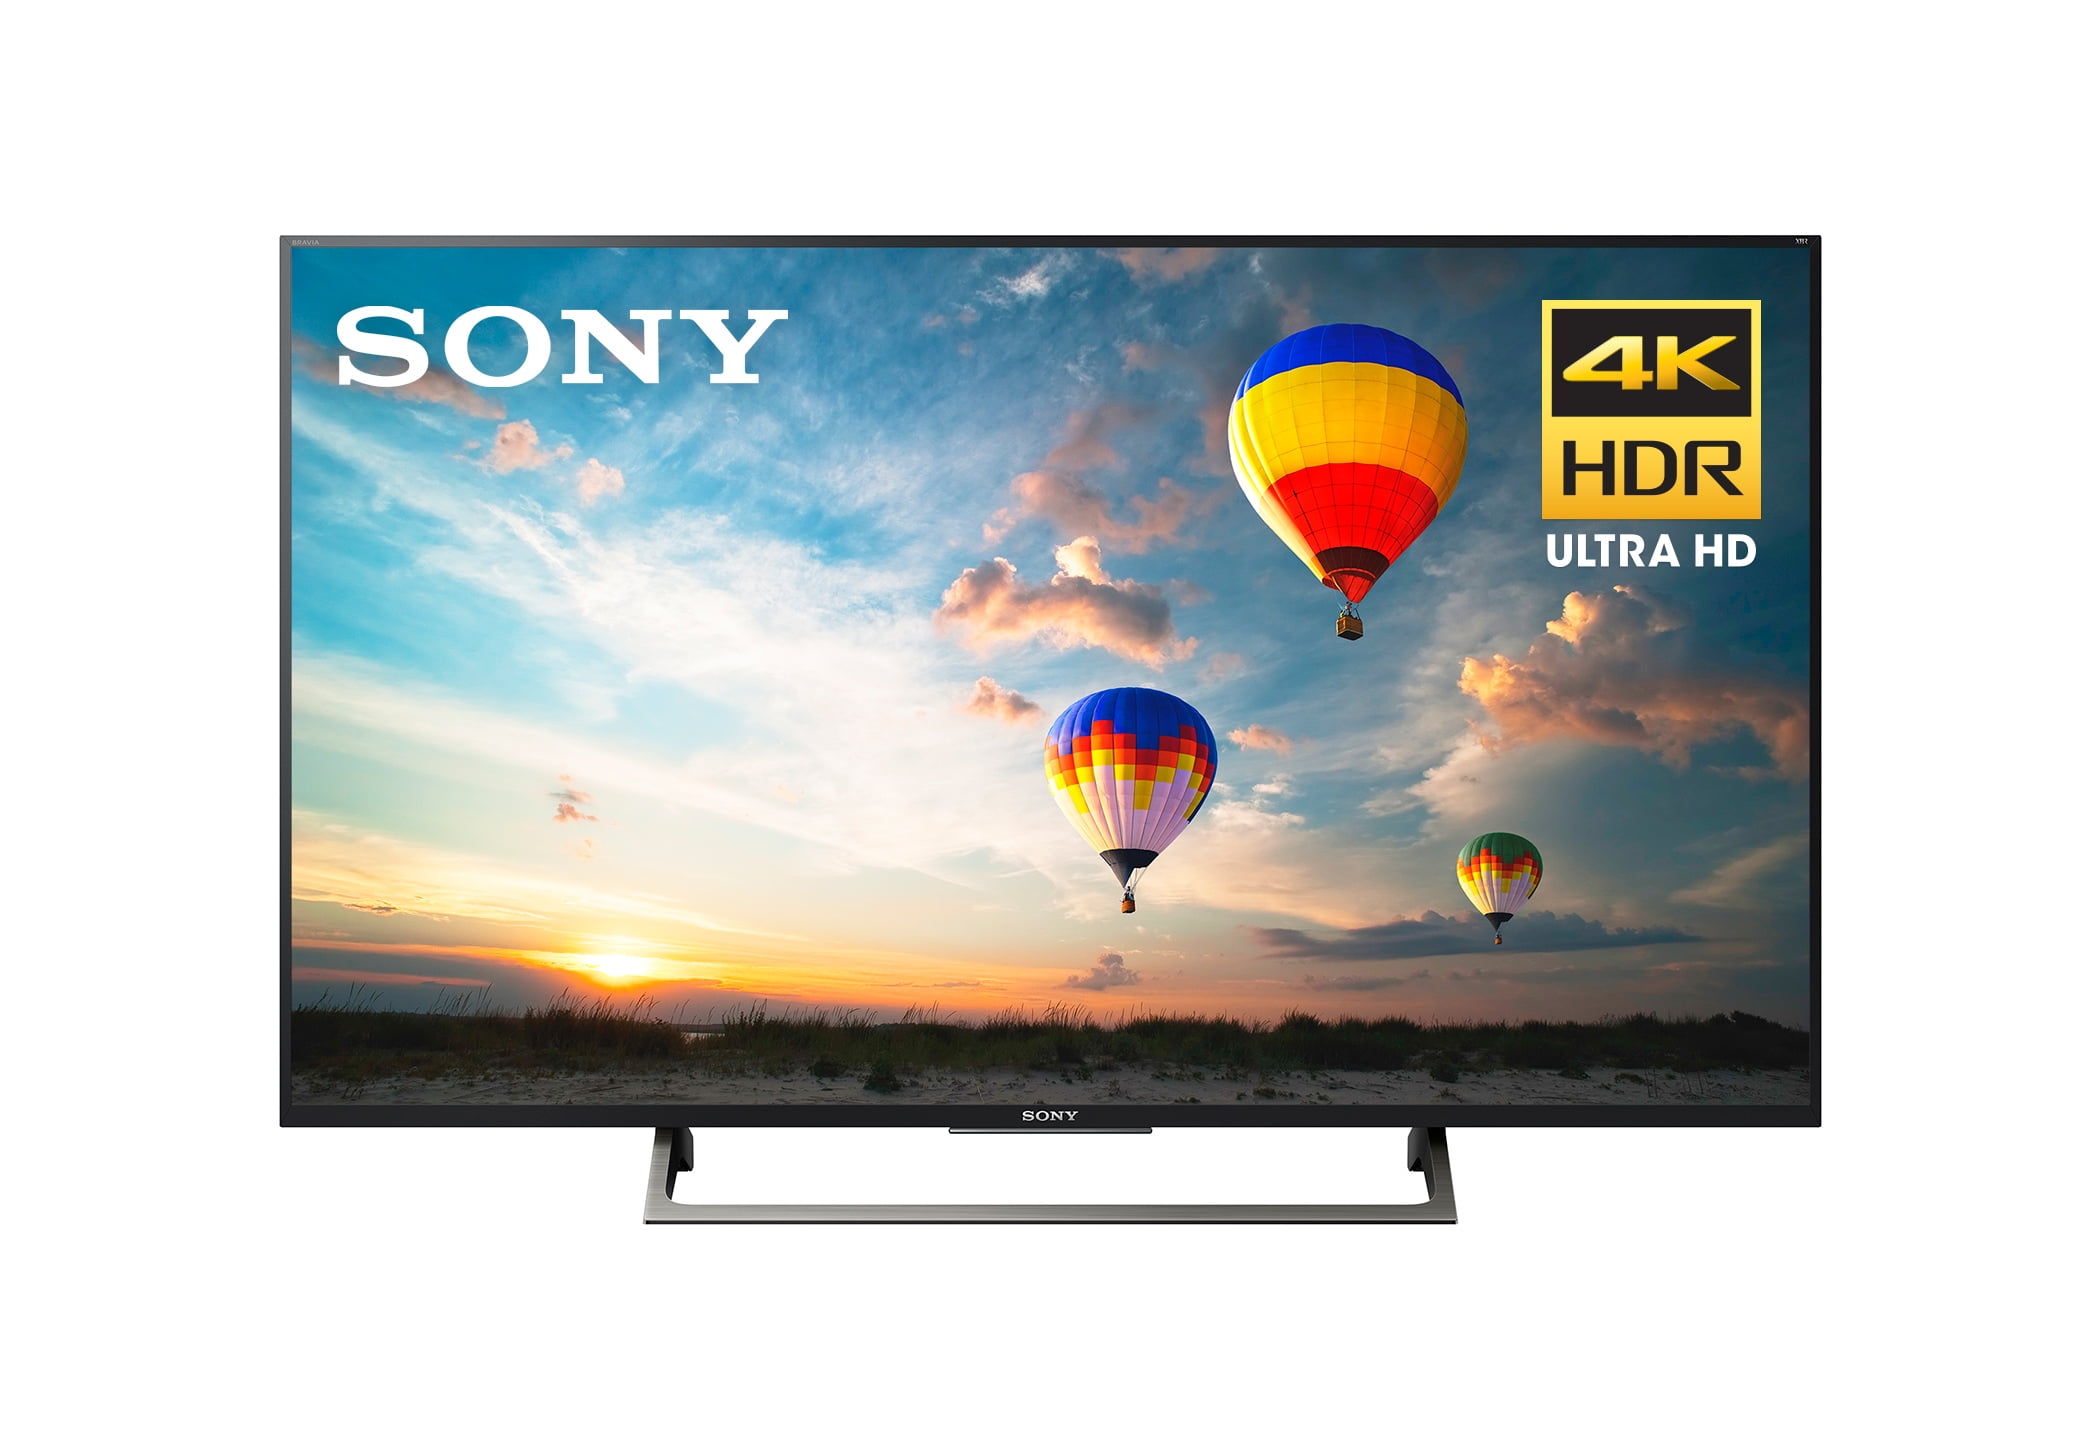 Sony 43 Class 4K UHD LED Android Smart TV HDR BRAVIA 800E Series XBR43X800E